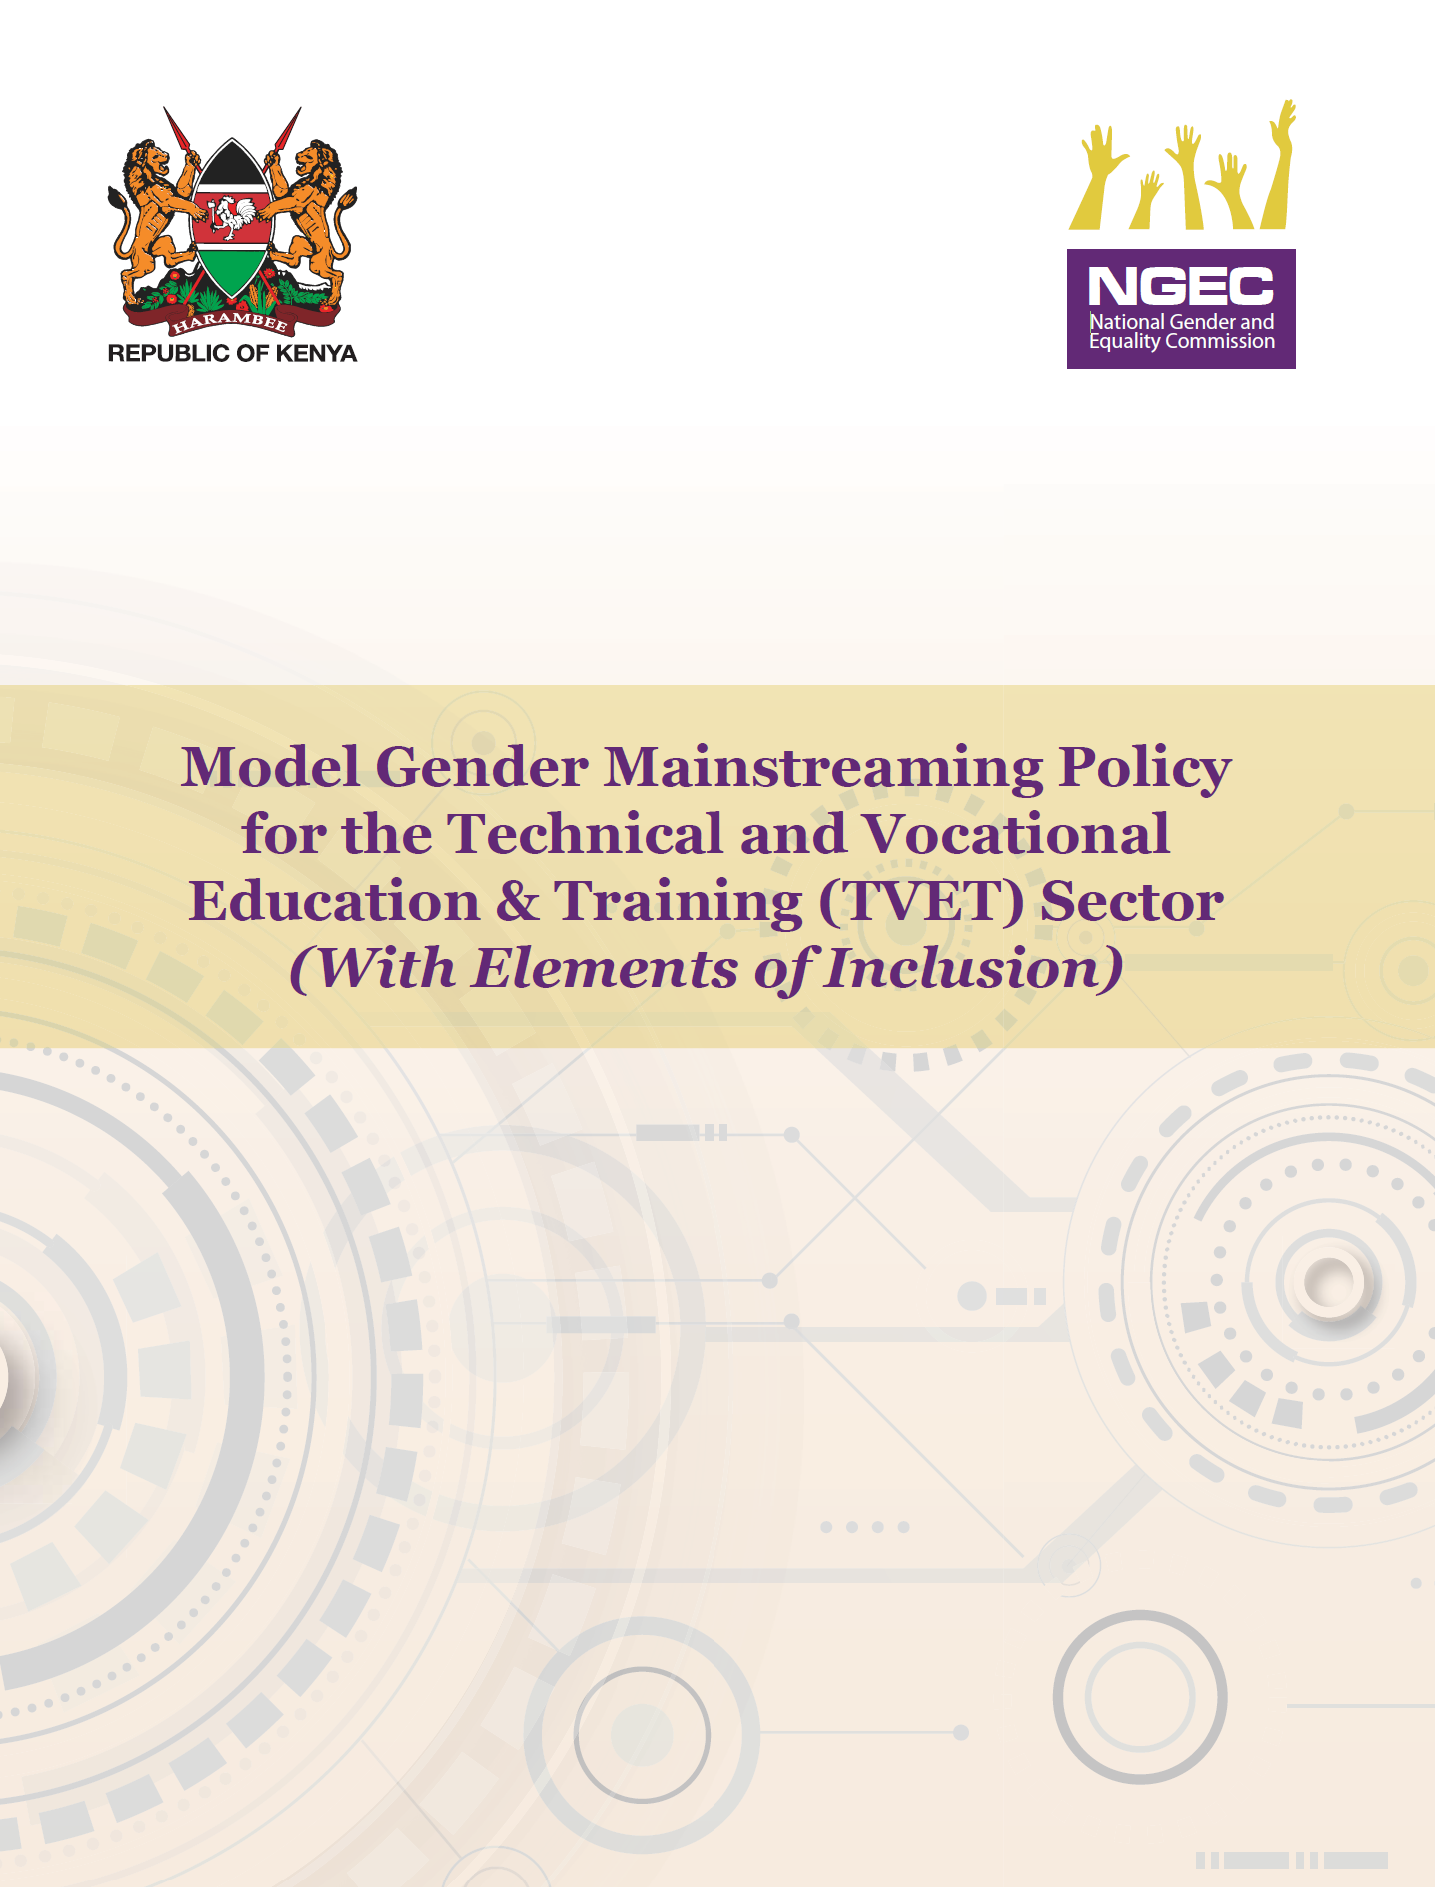 Model Gender Mainstreaming Policy for the Technical and Vocational Education and Training Sector